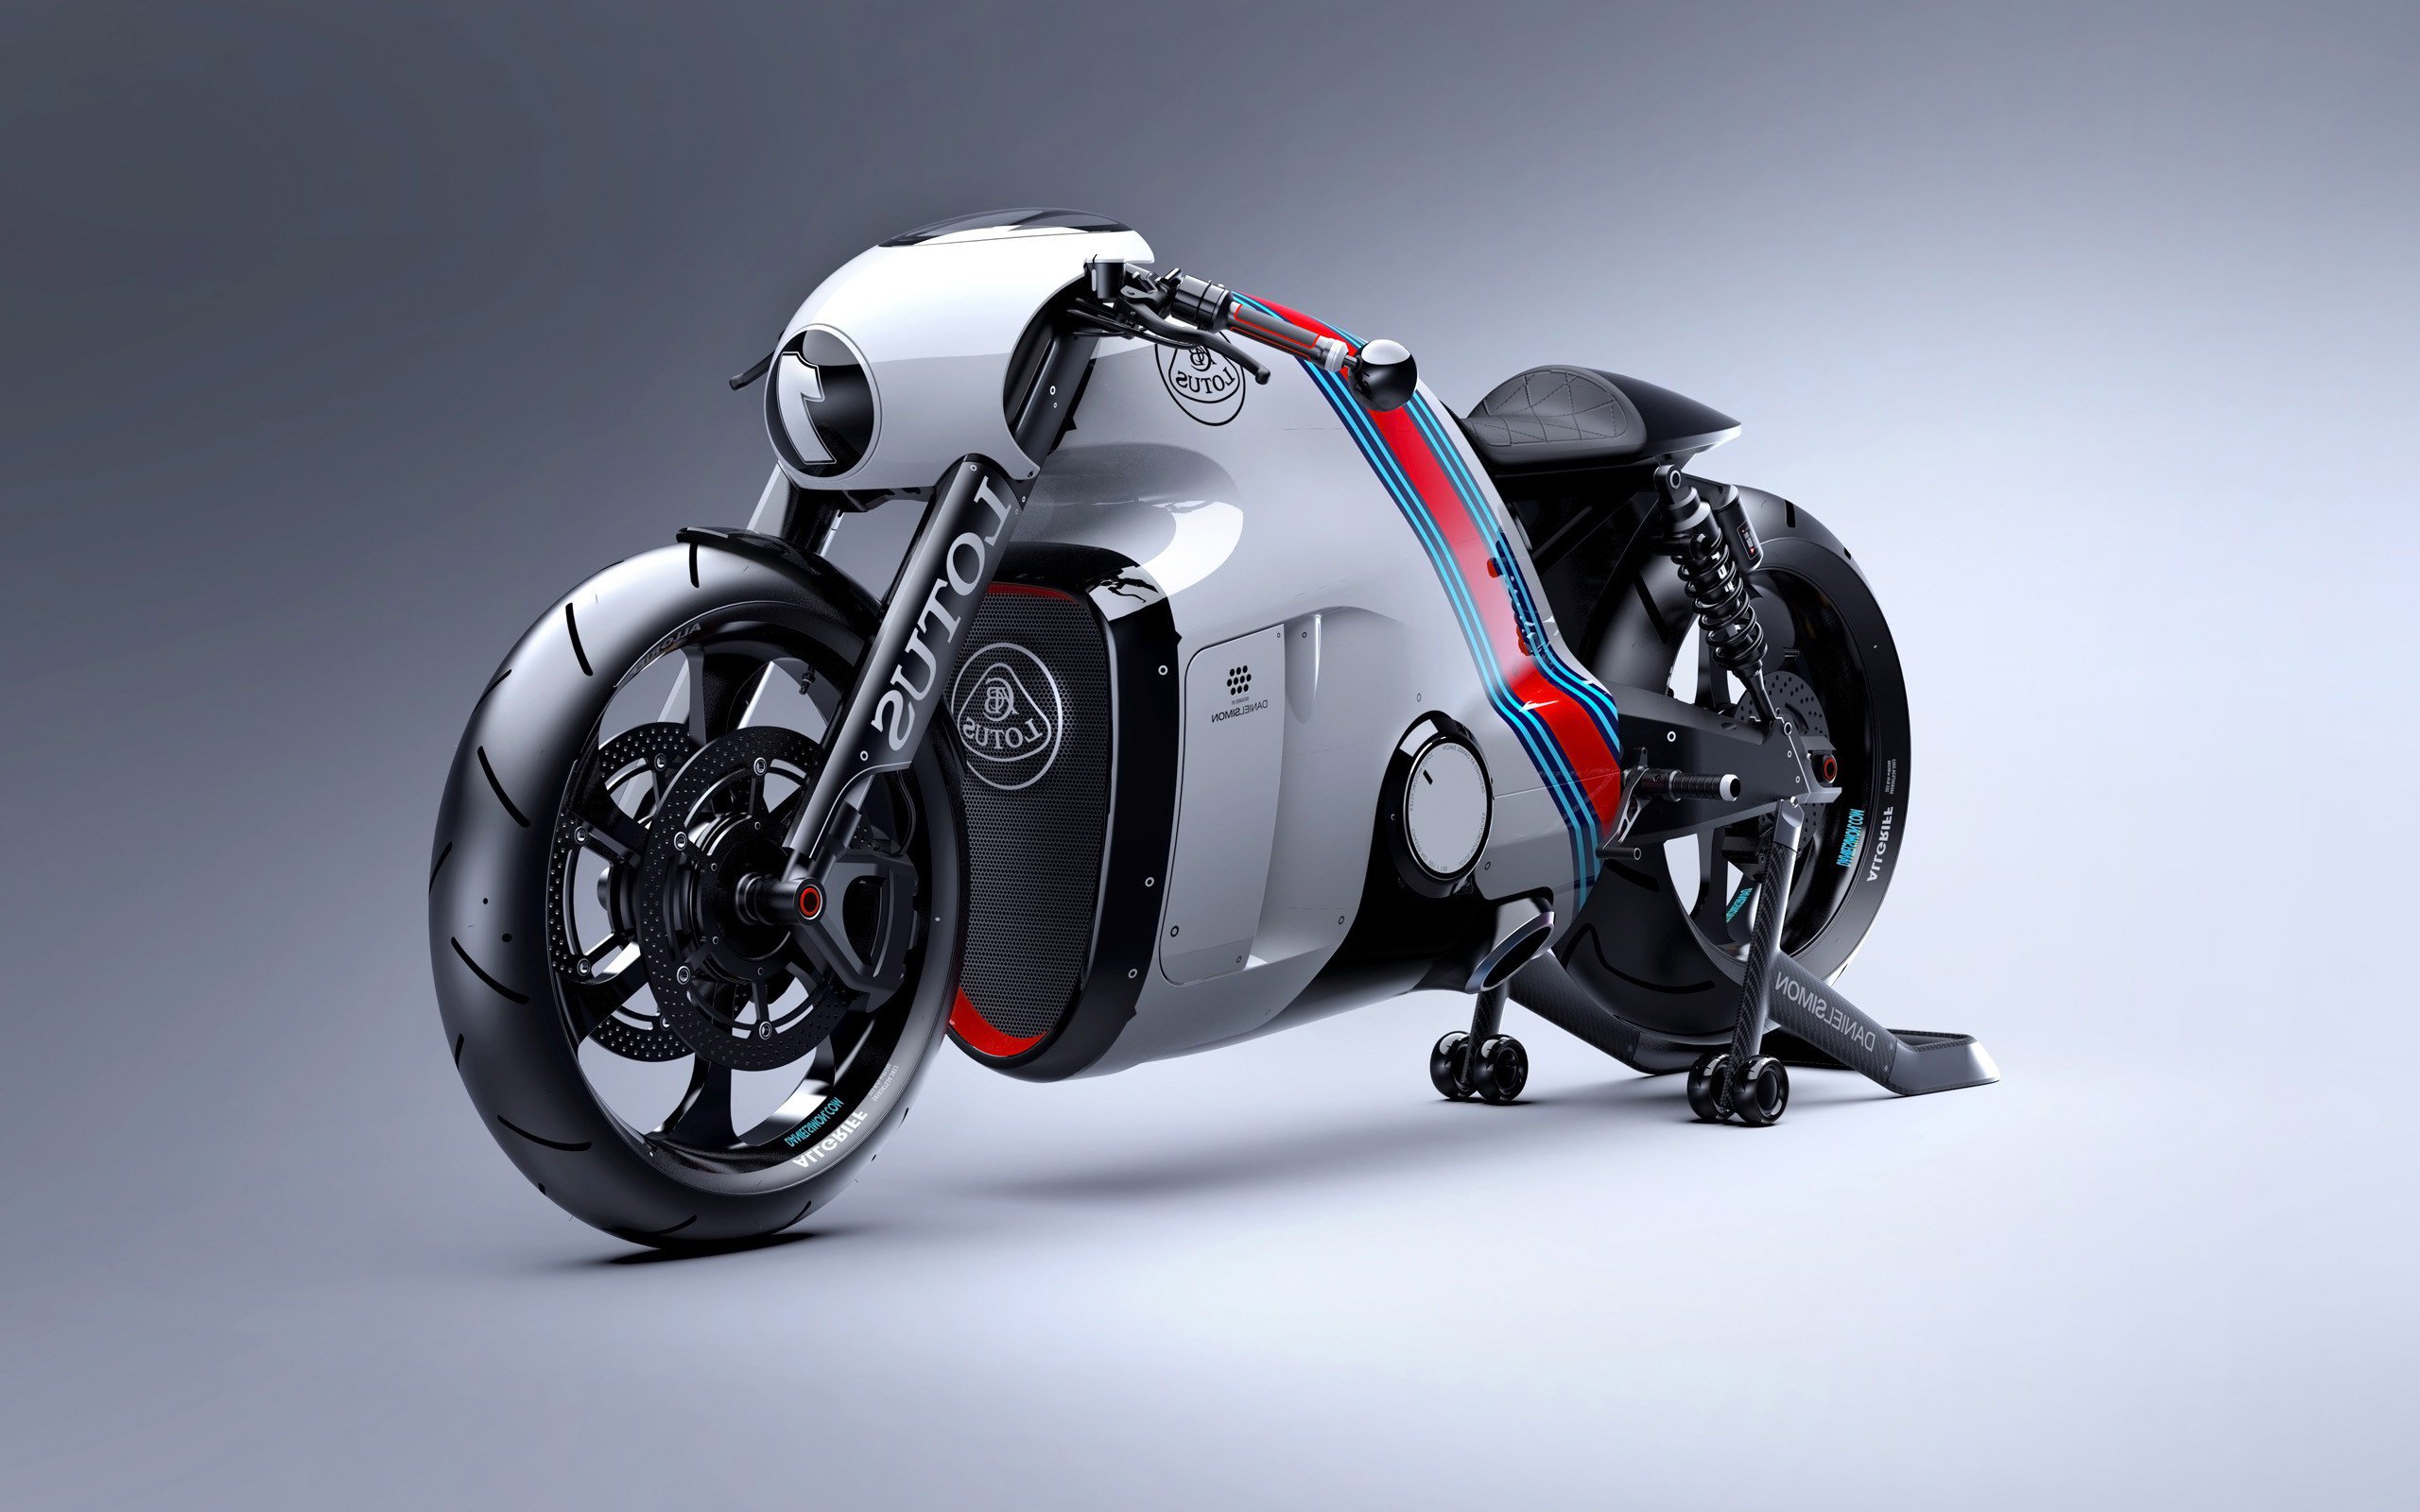 Wallpapers motorcycles concept bikes electric on the desktop